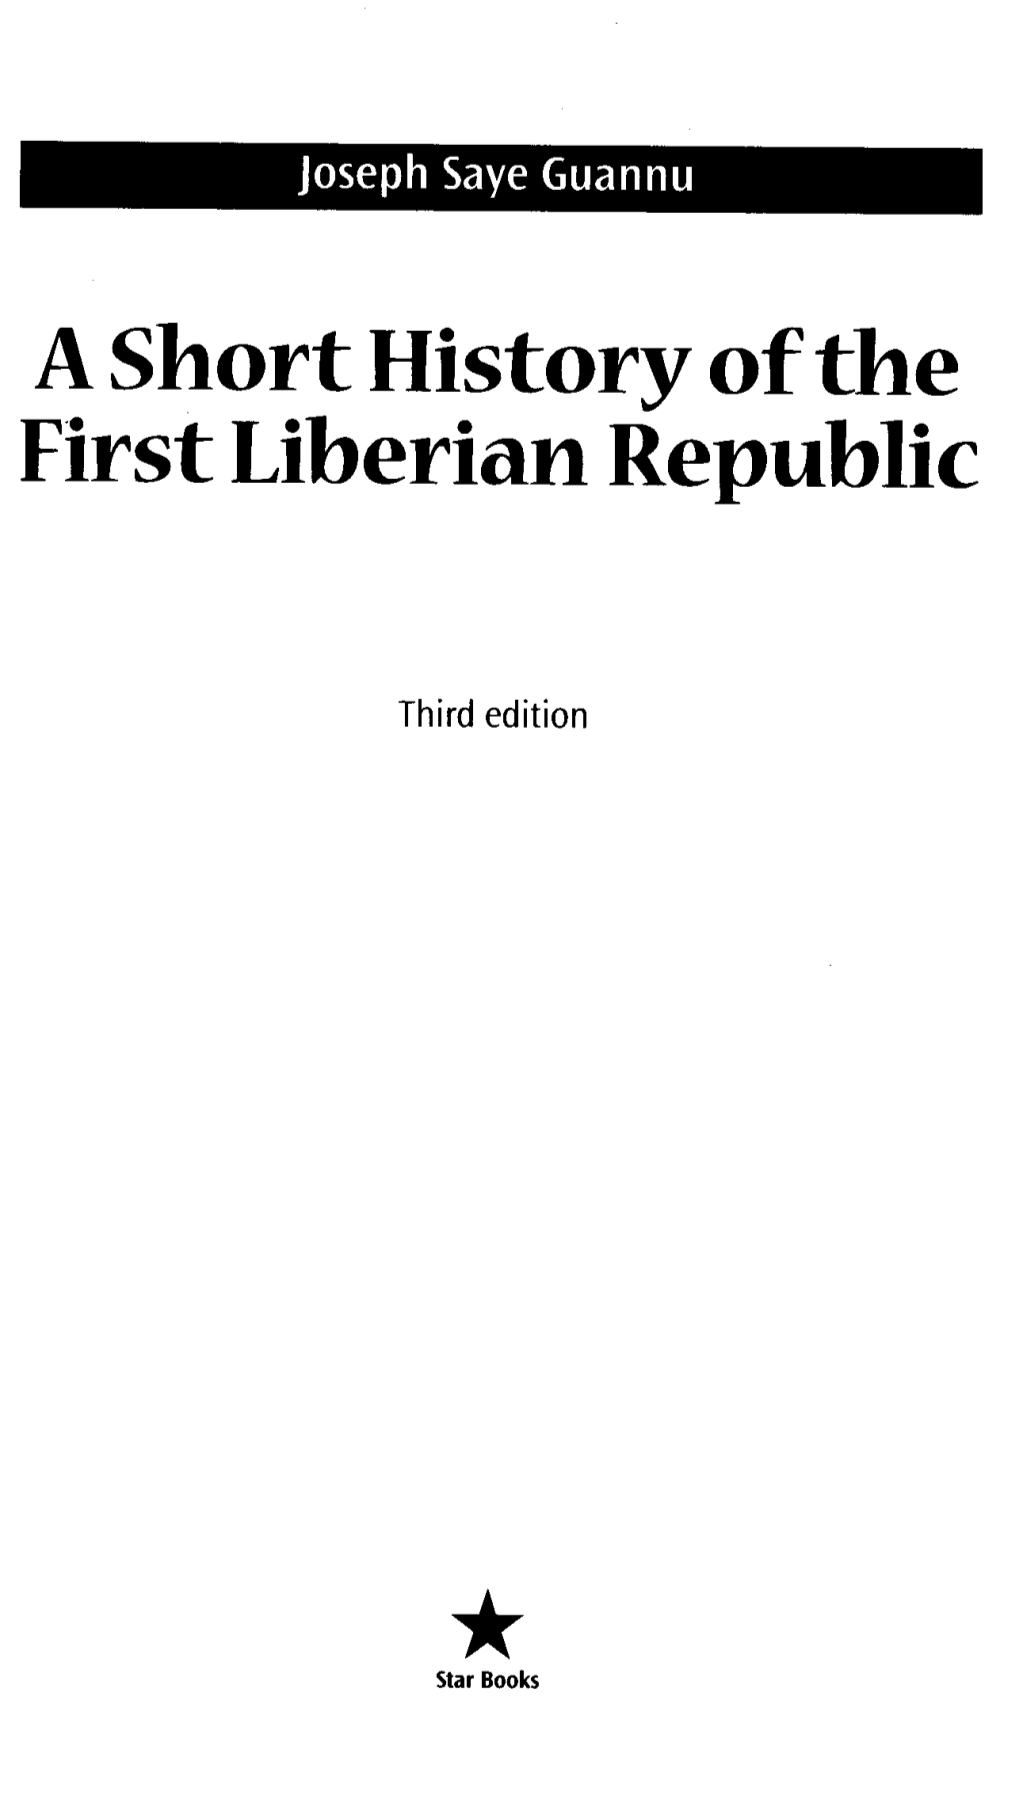 A Short History of the First Liberian Republic